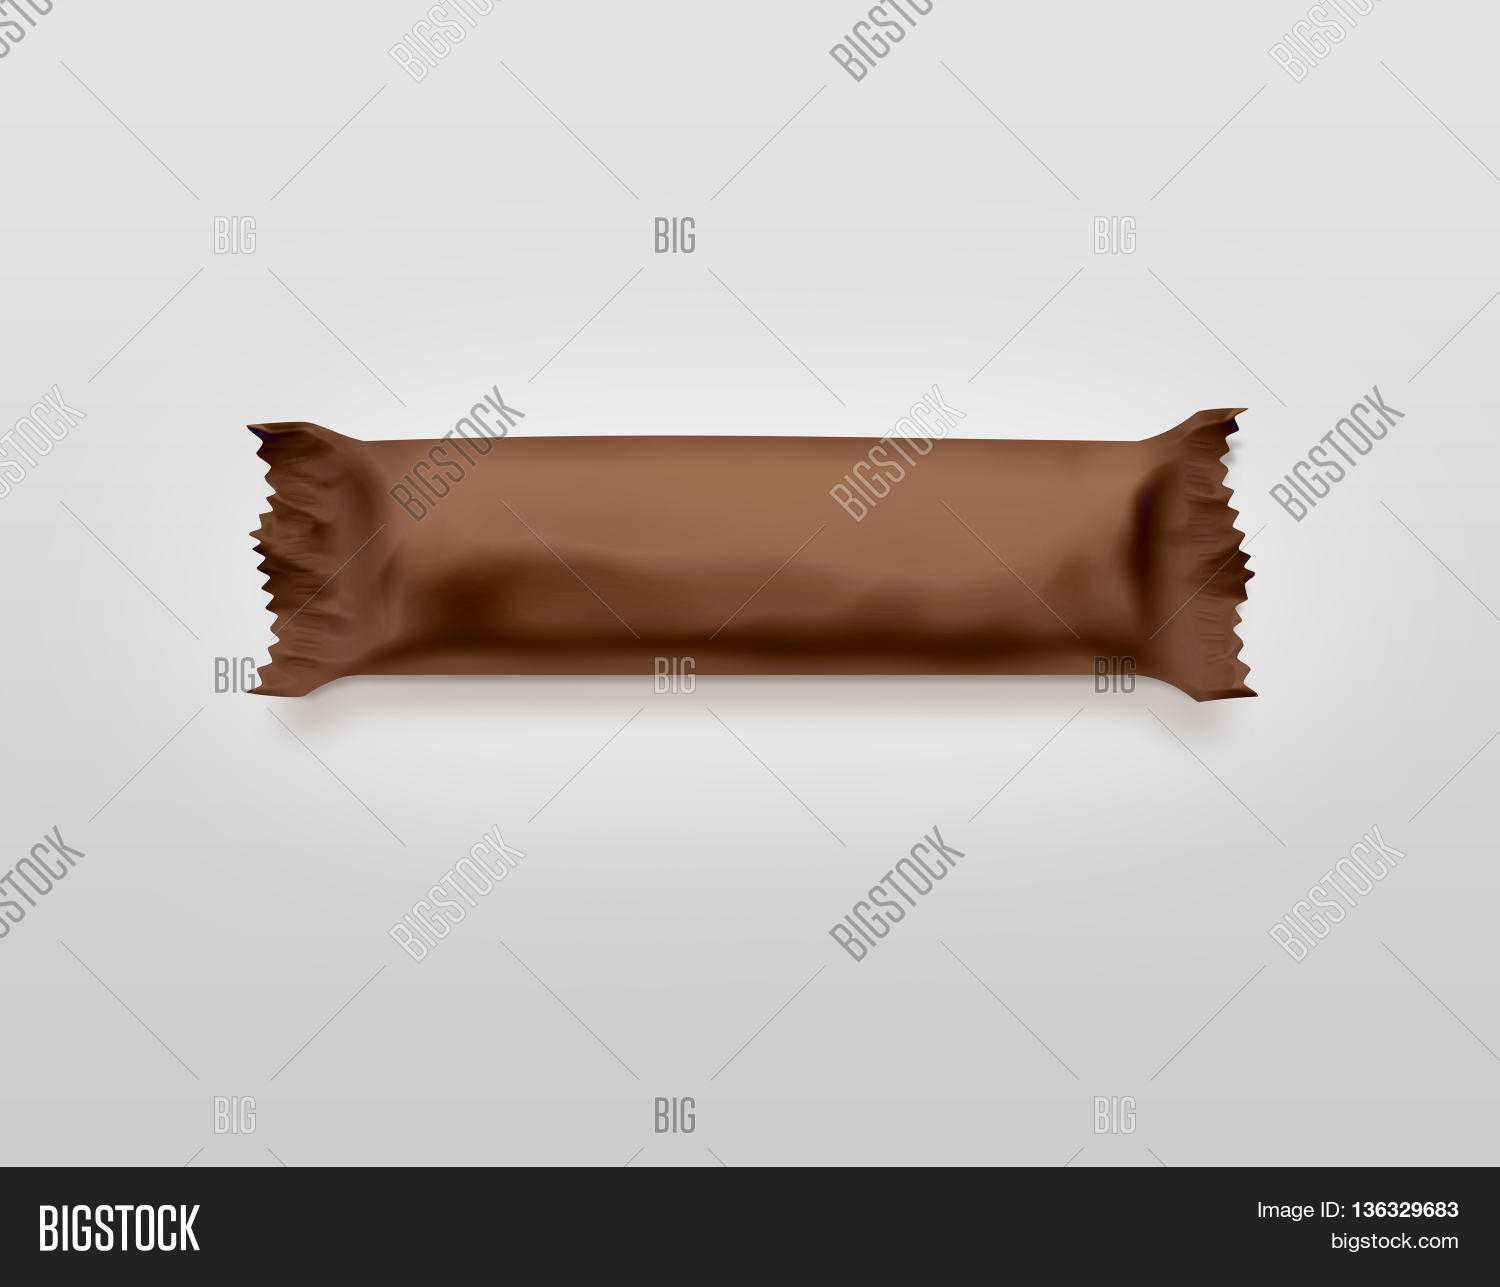 Blank Brown Candy Bar Image & Photo (Free Trial) | Bigstock Intended For Blank Candy Bar Wrapper Template